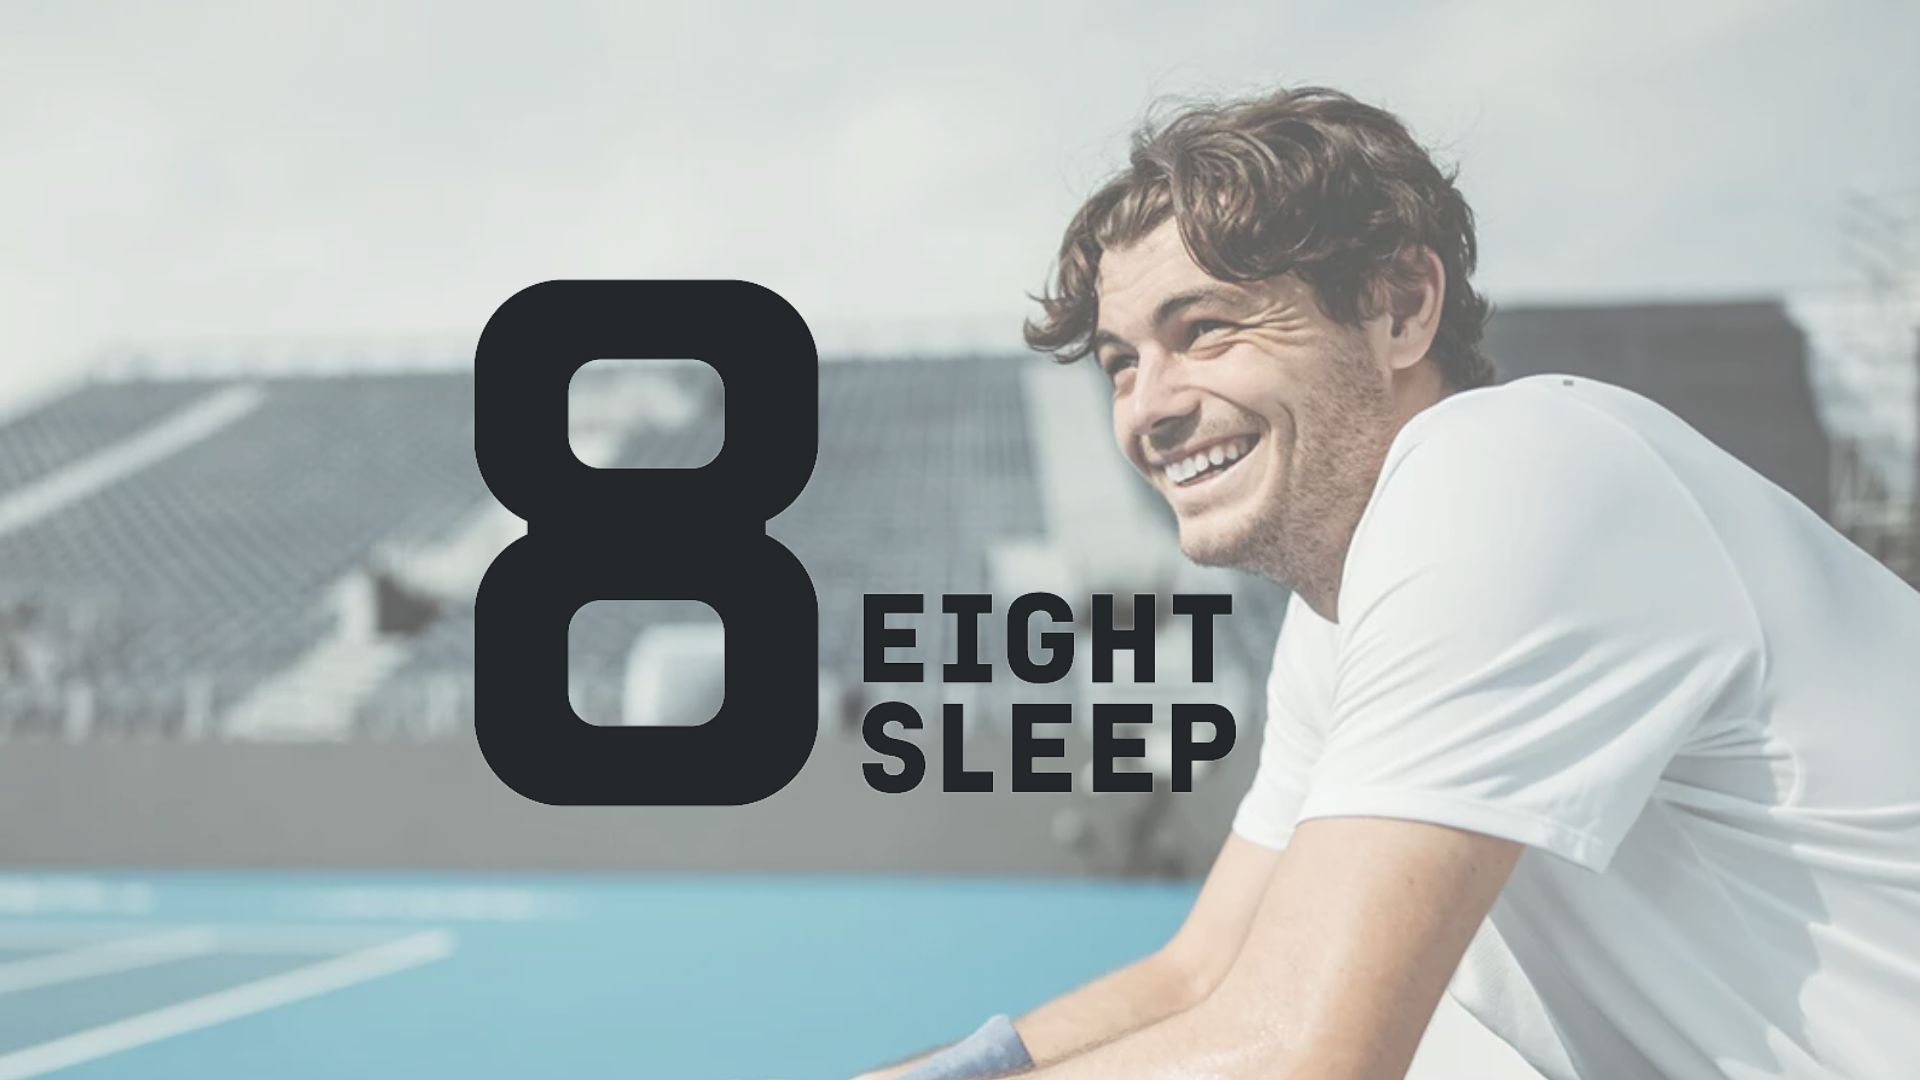 Taylor Fritz Named Investor in Eight Sleep